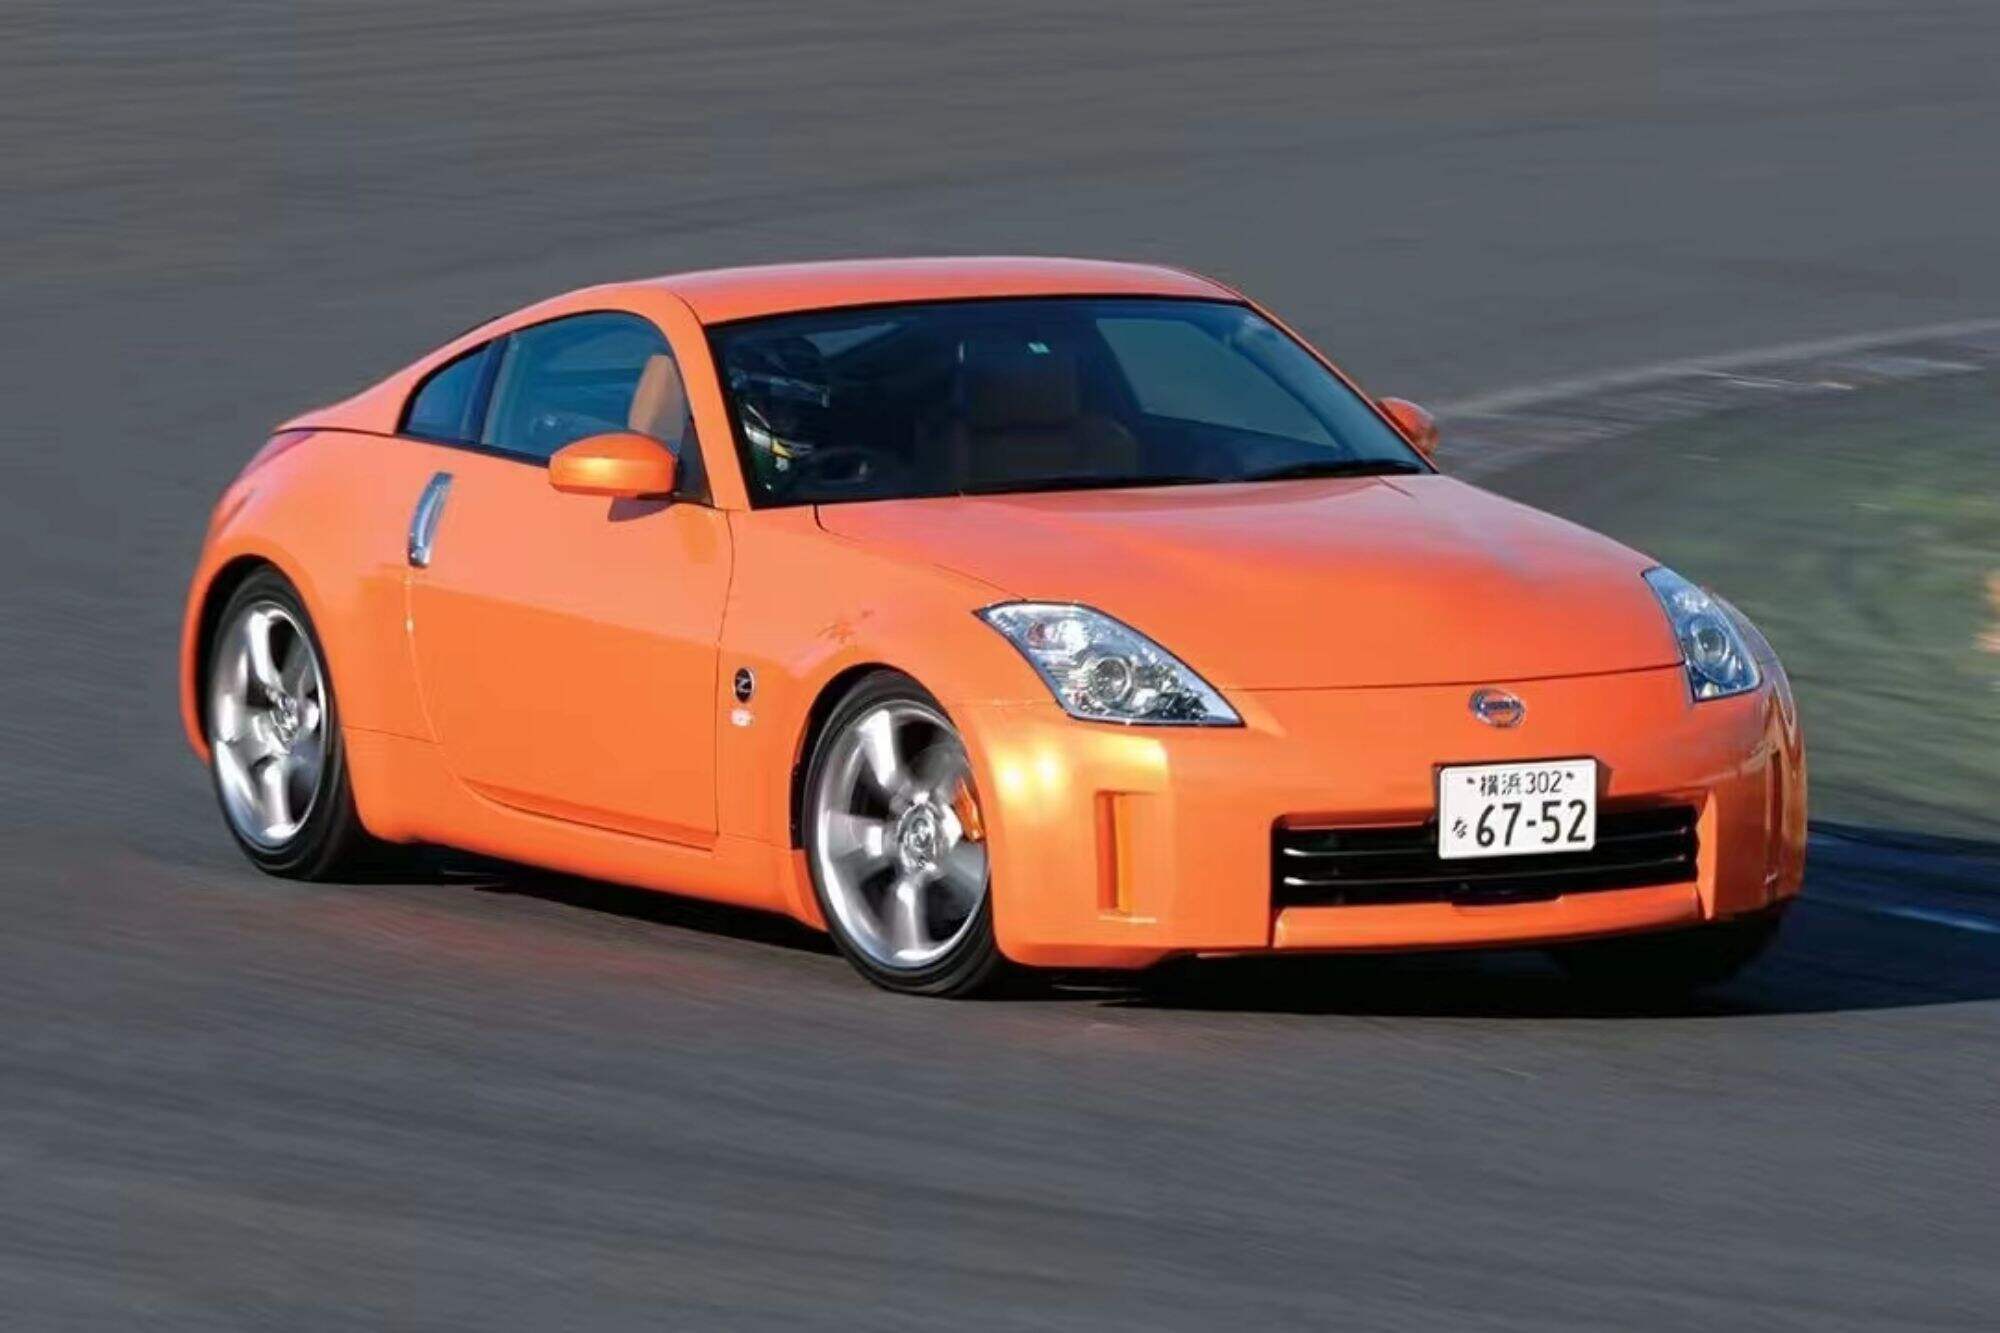 Why Choose a Carbon Fiber Hood for Your 350Z?